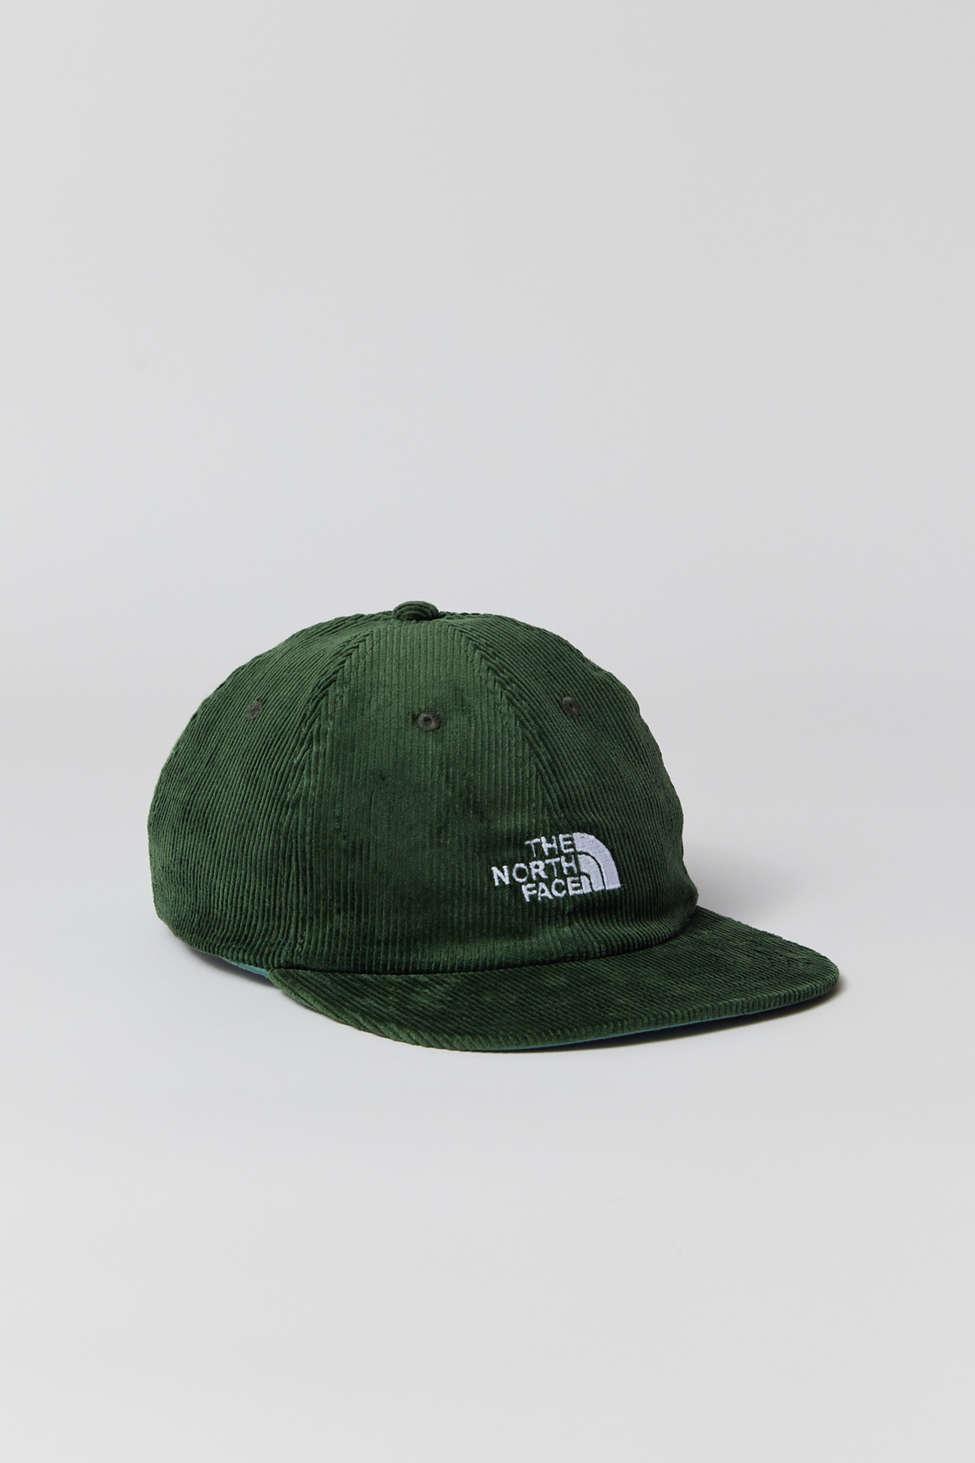 The North Face Corduroy Hat In Olive,at Urban Outfitters in Green